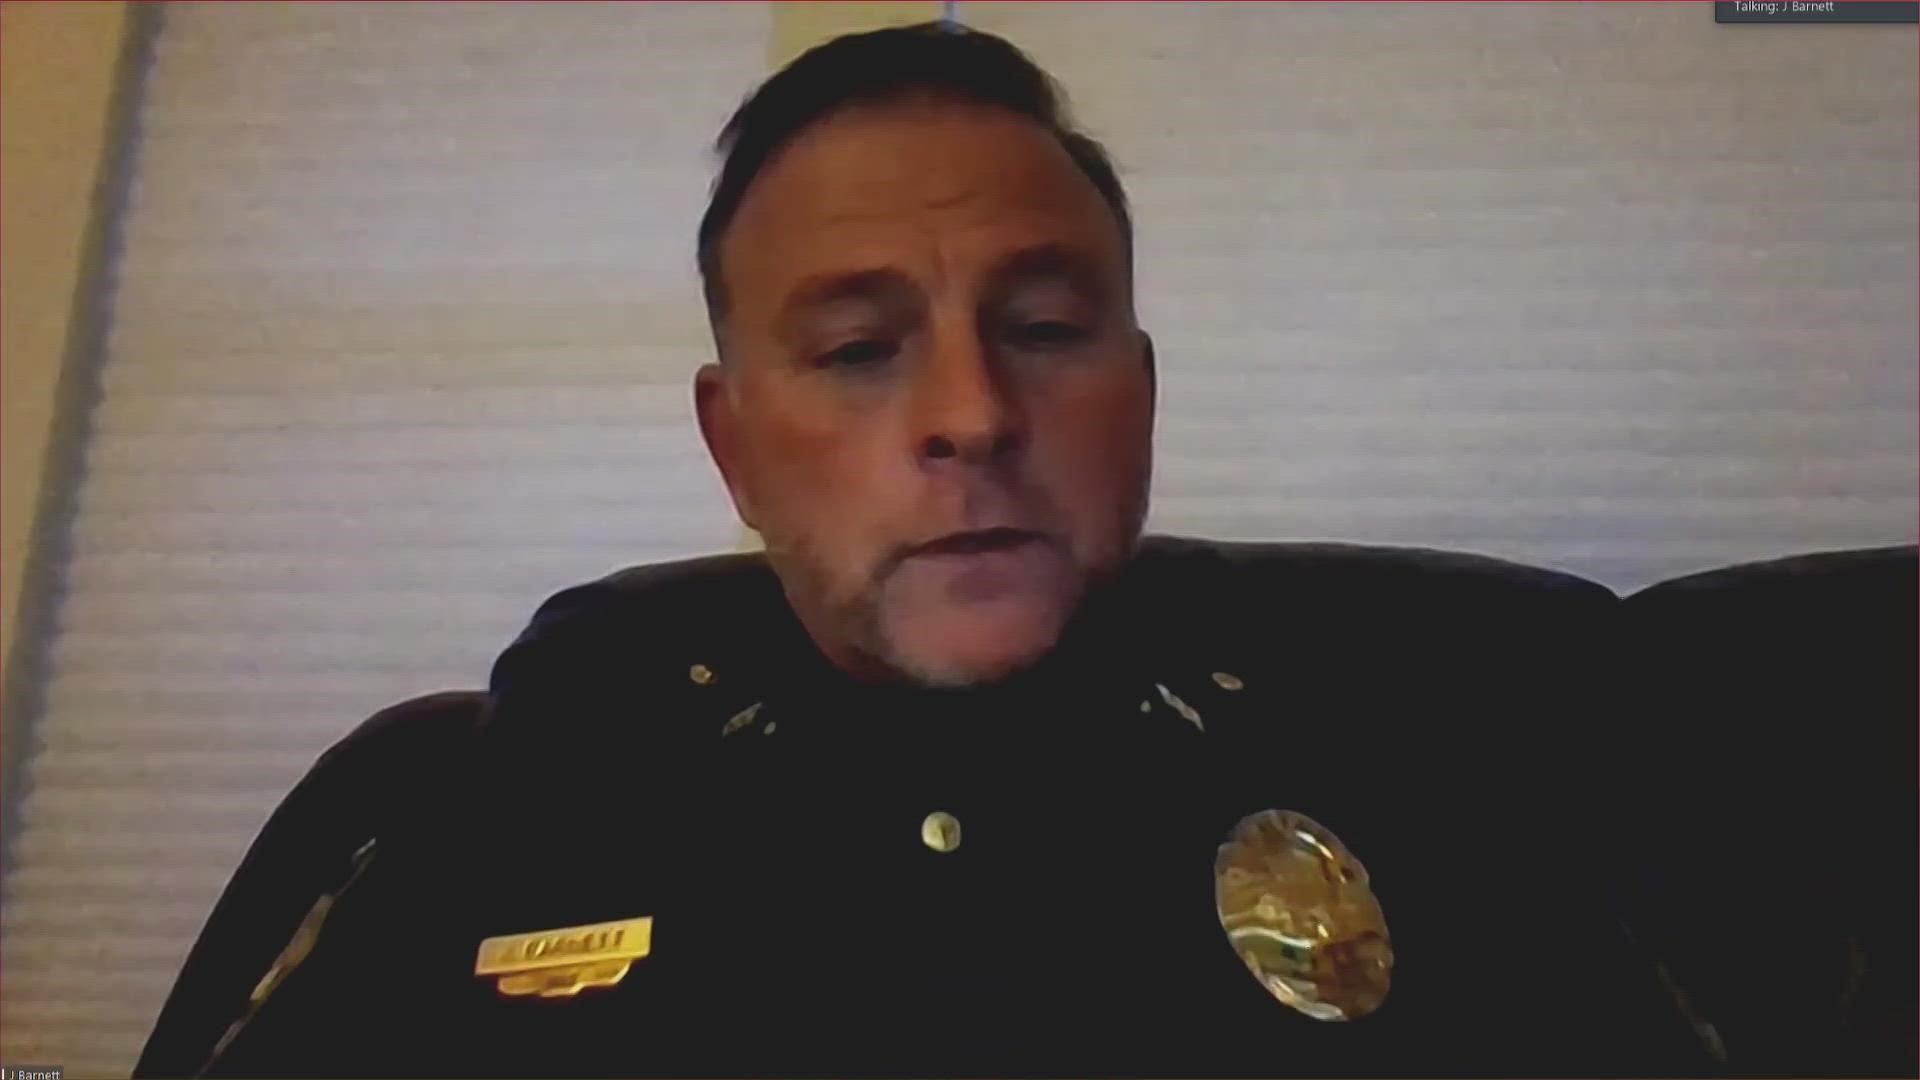 Kyle Police Department Chief Jeff Barnett joined KVUE to discuss conditions in the area.